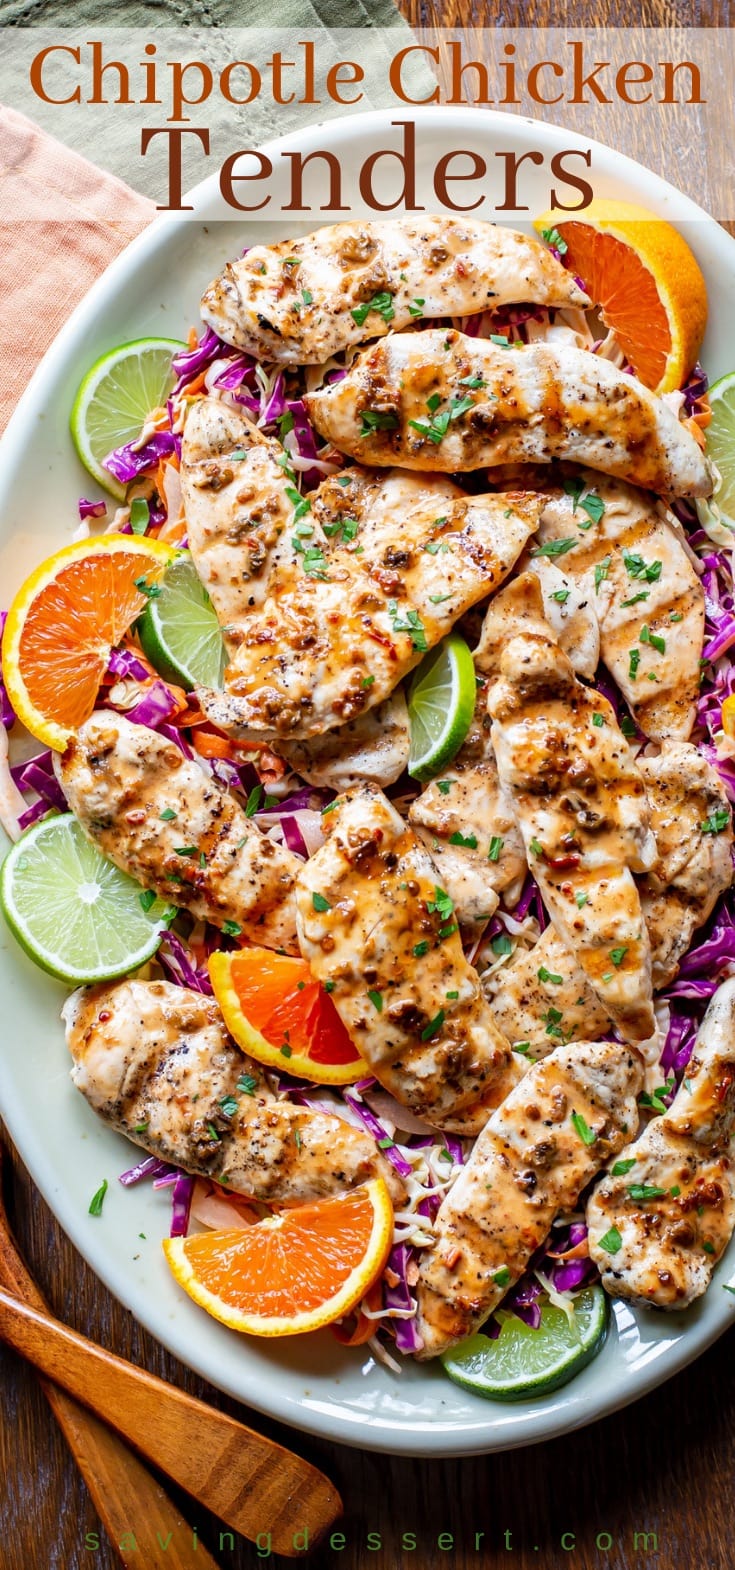 Chipotle chicken tenders with a spicy purple slaw, served with orange and lime wedges